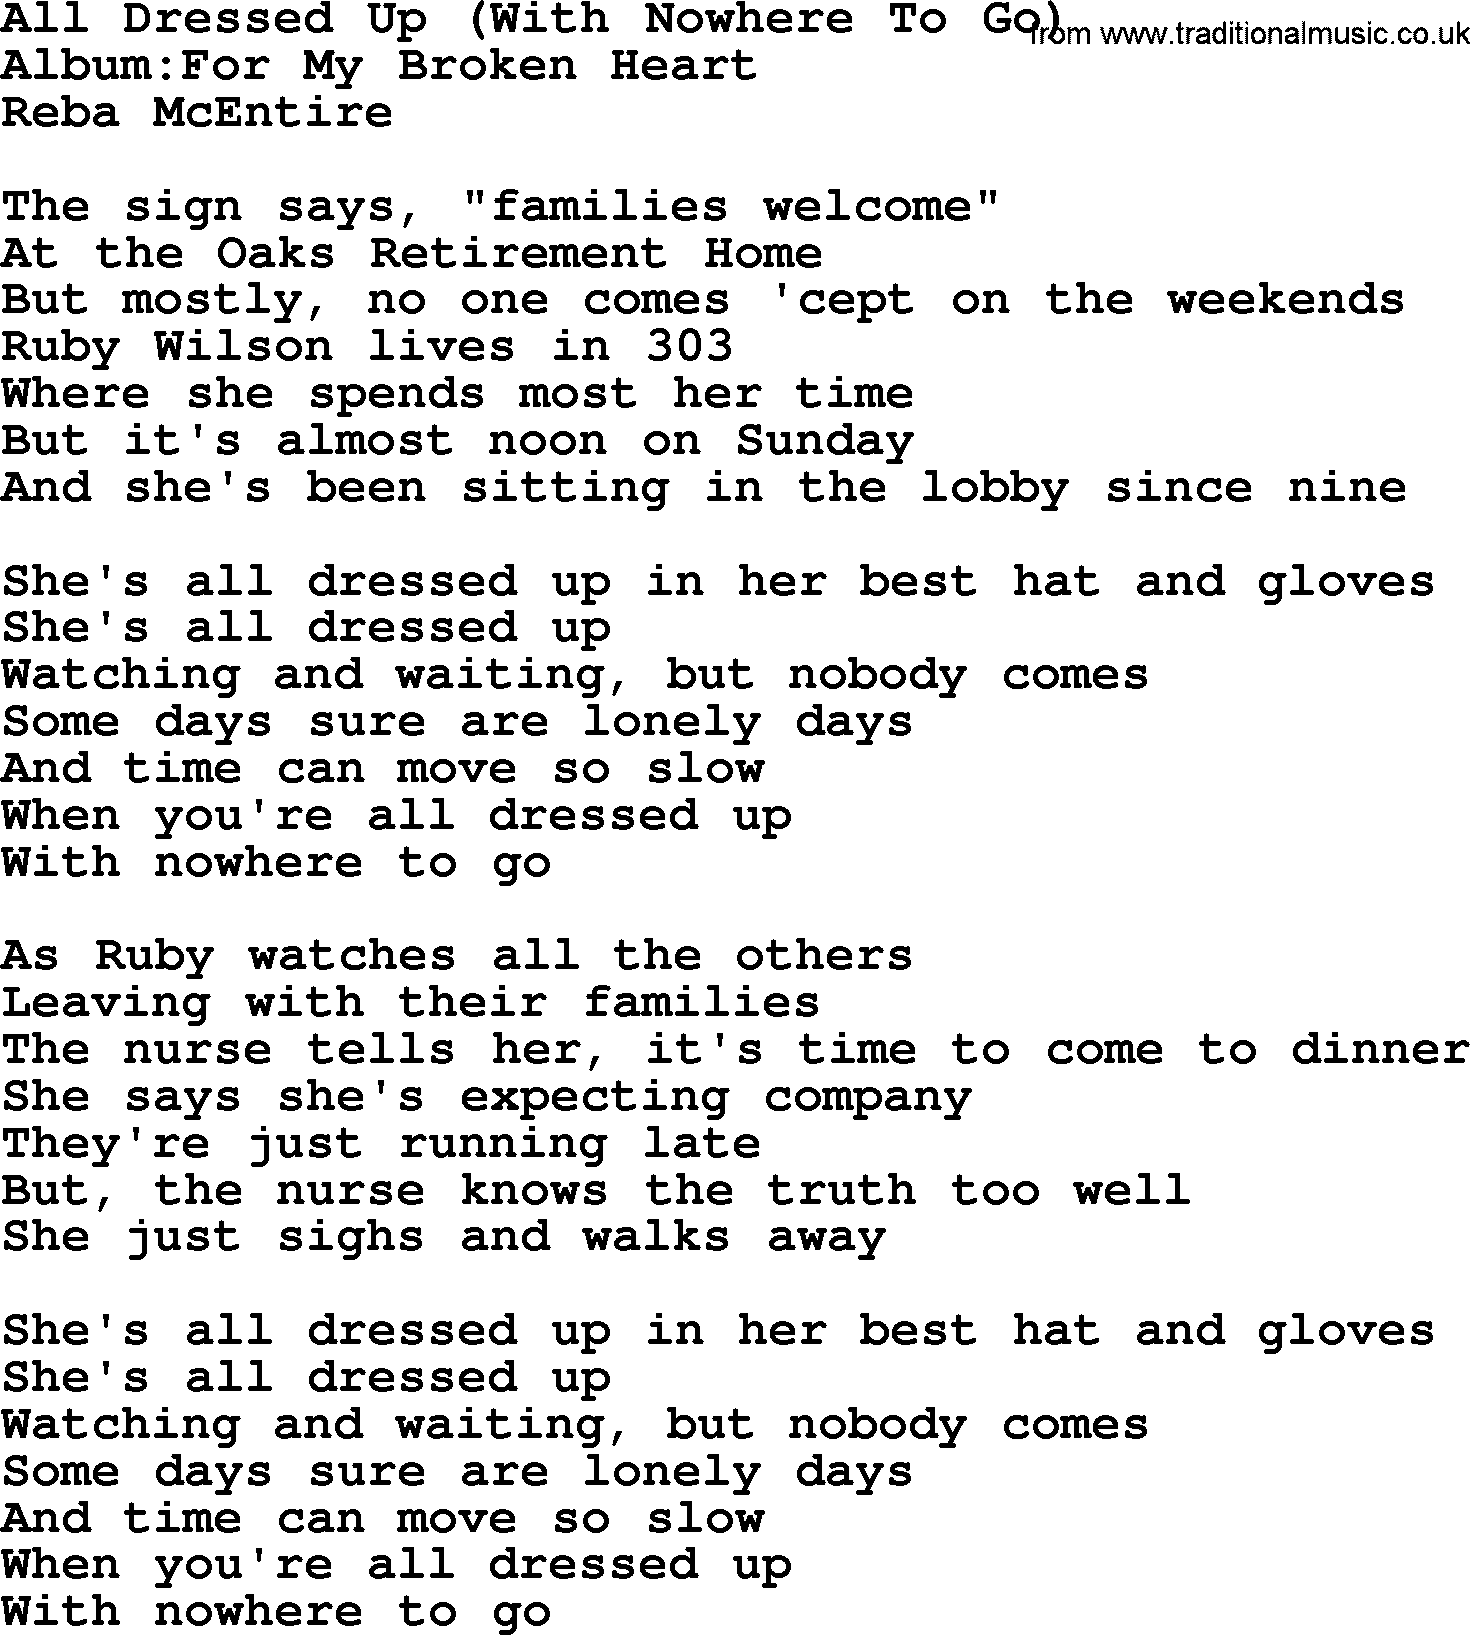 Reba McEntire song: All Dressed Up With Nowhere To Go lyrics